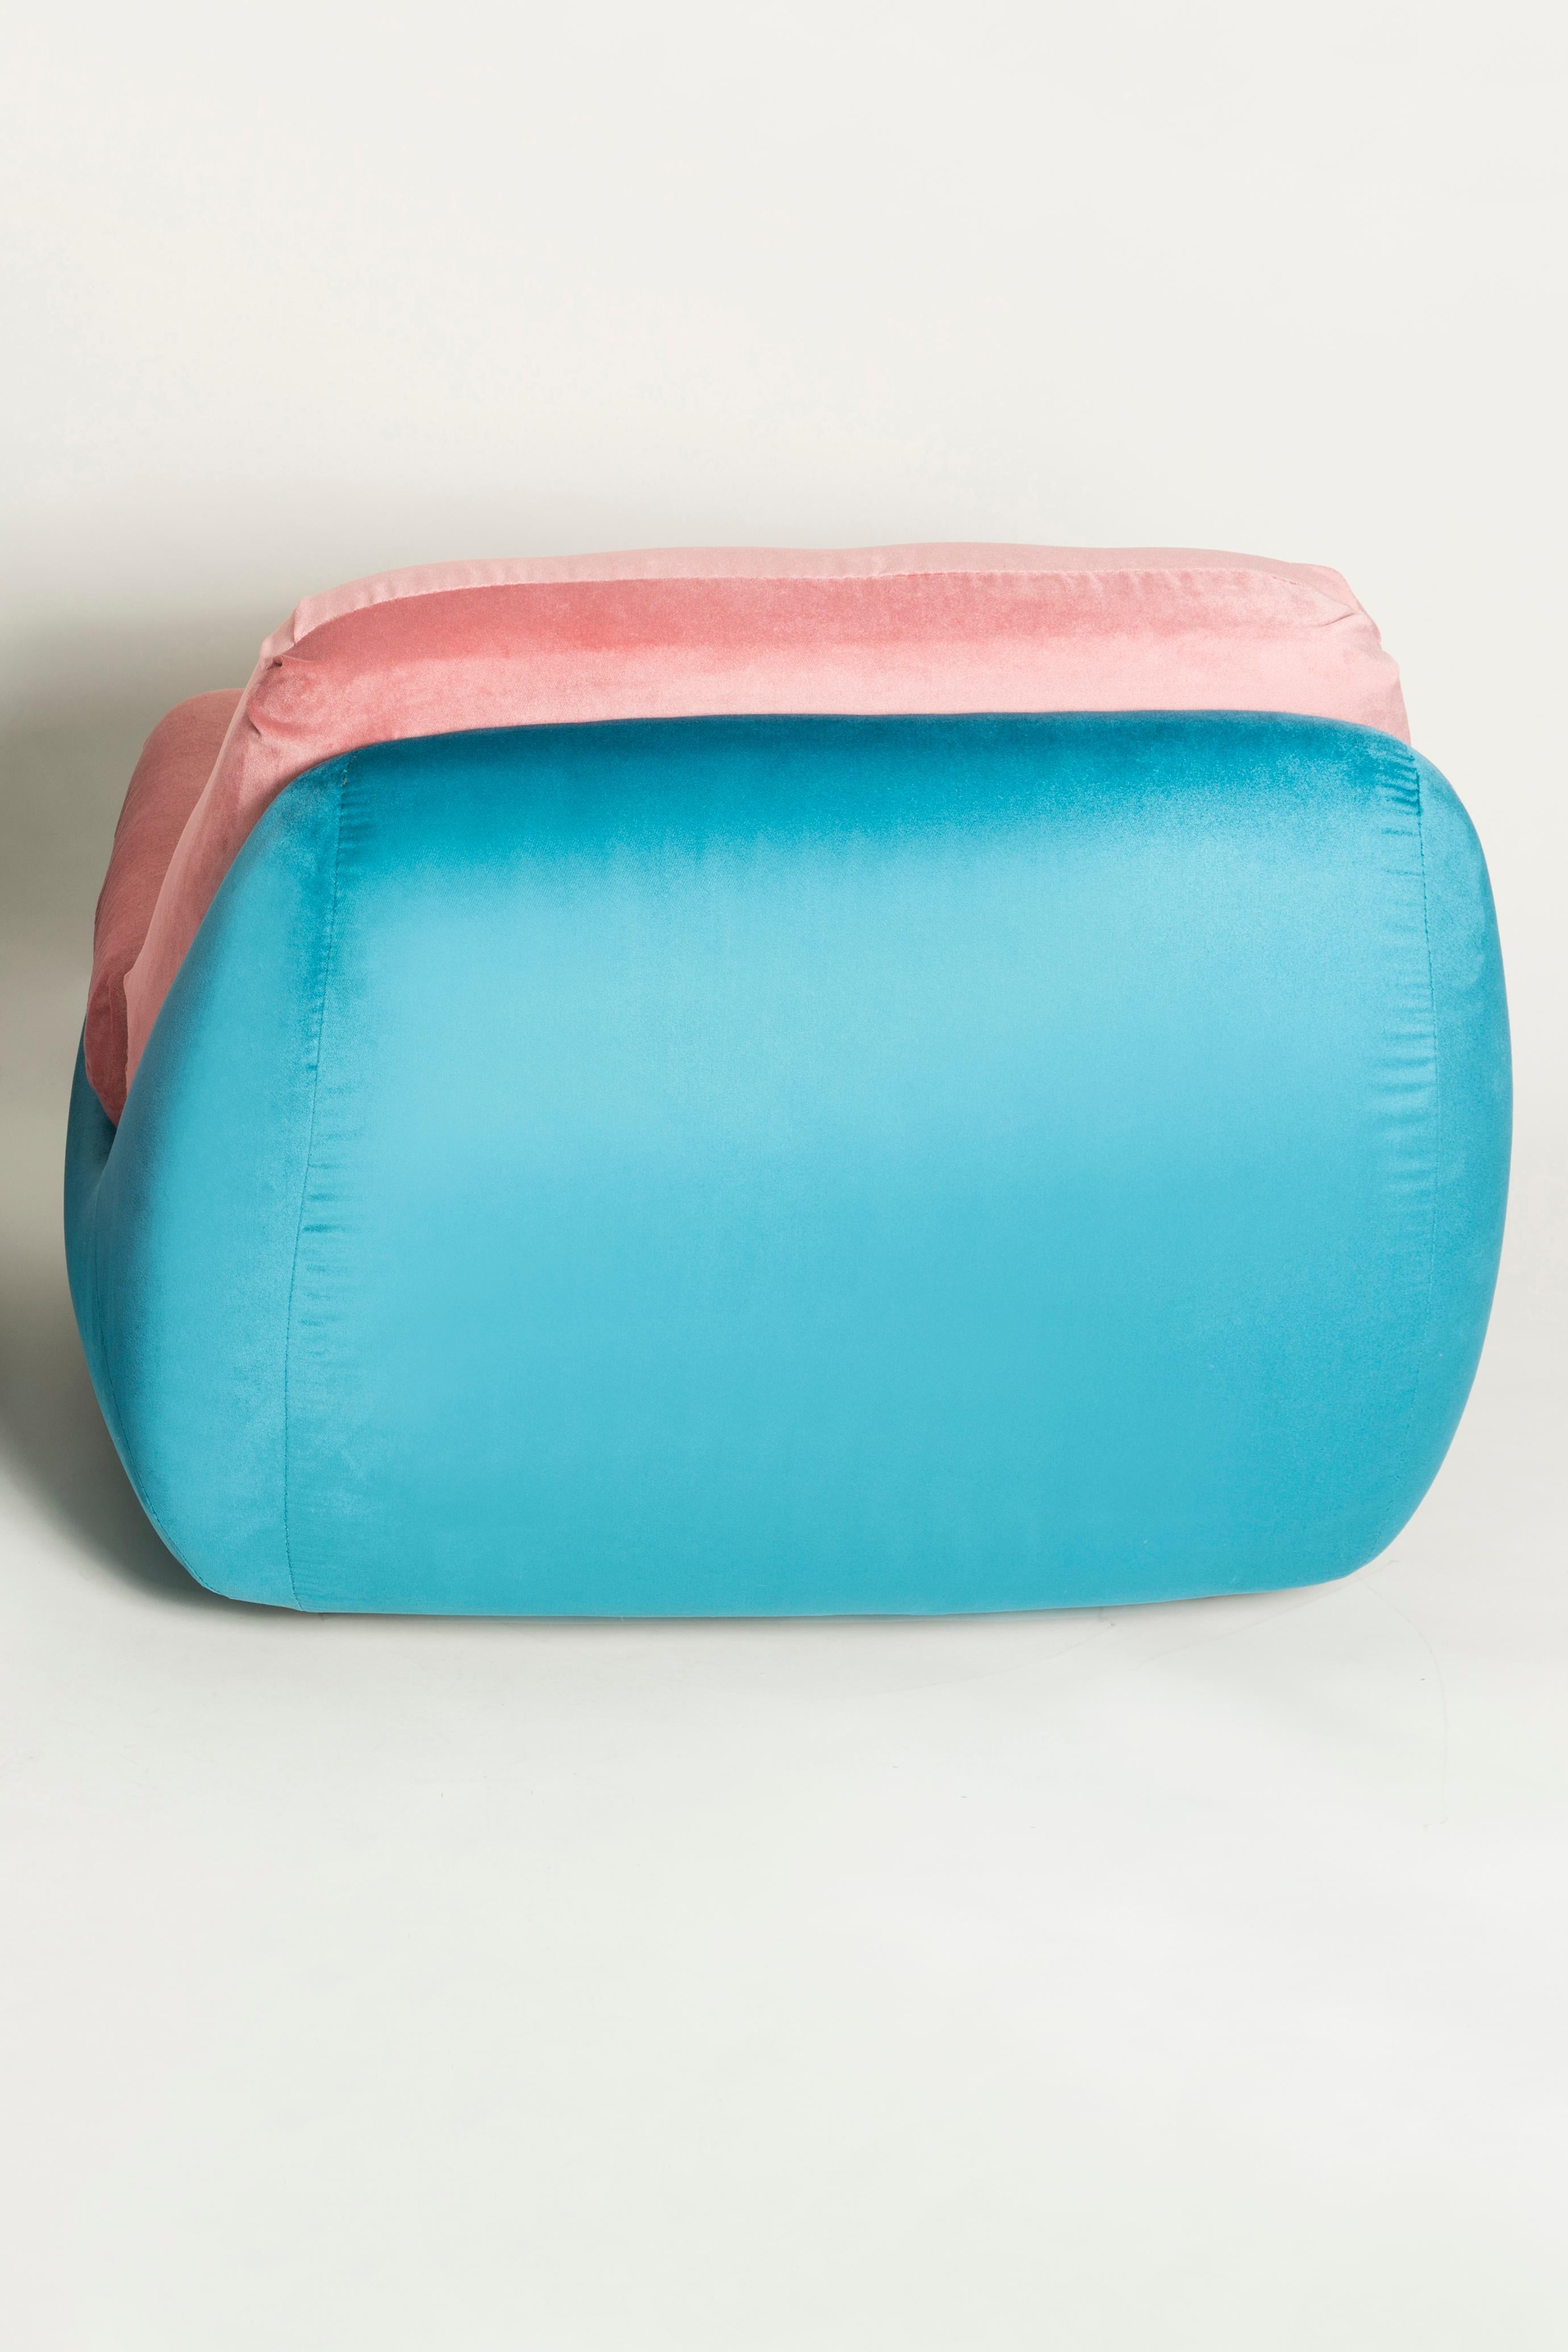 20th Century Vintage Pink and Blue Atlantis Armchair, 1960s For Sale 2